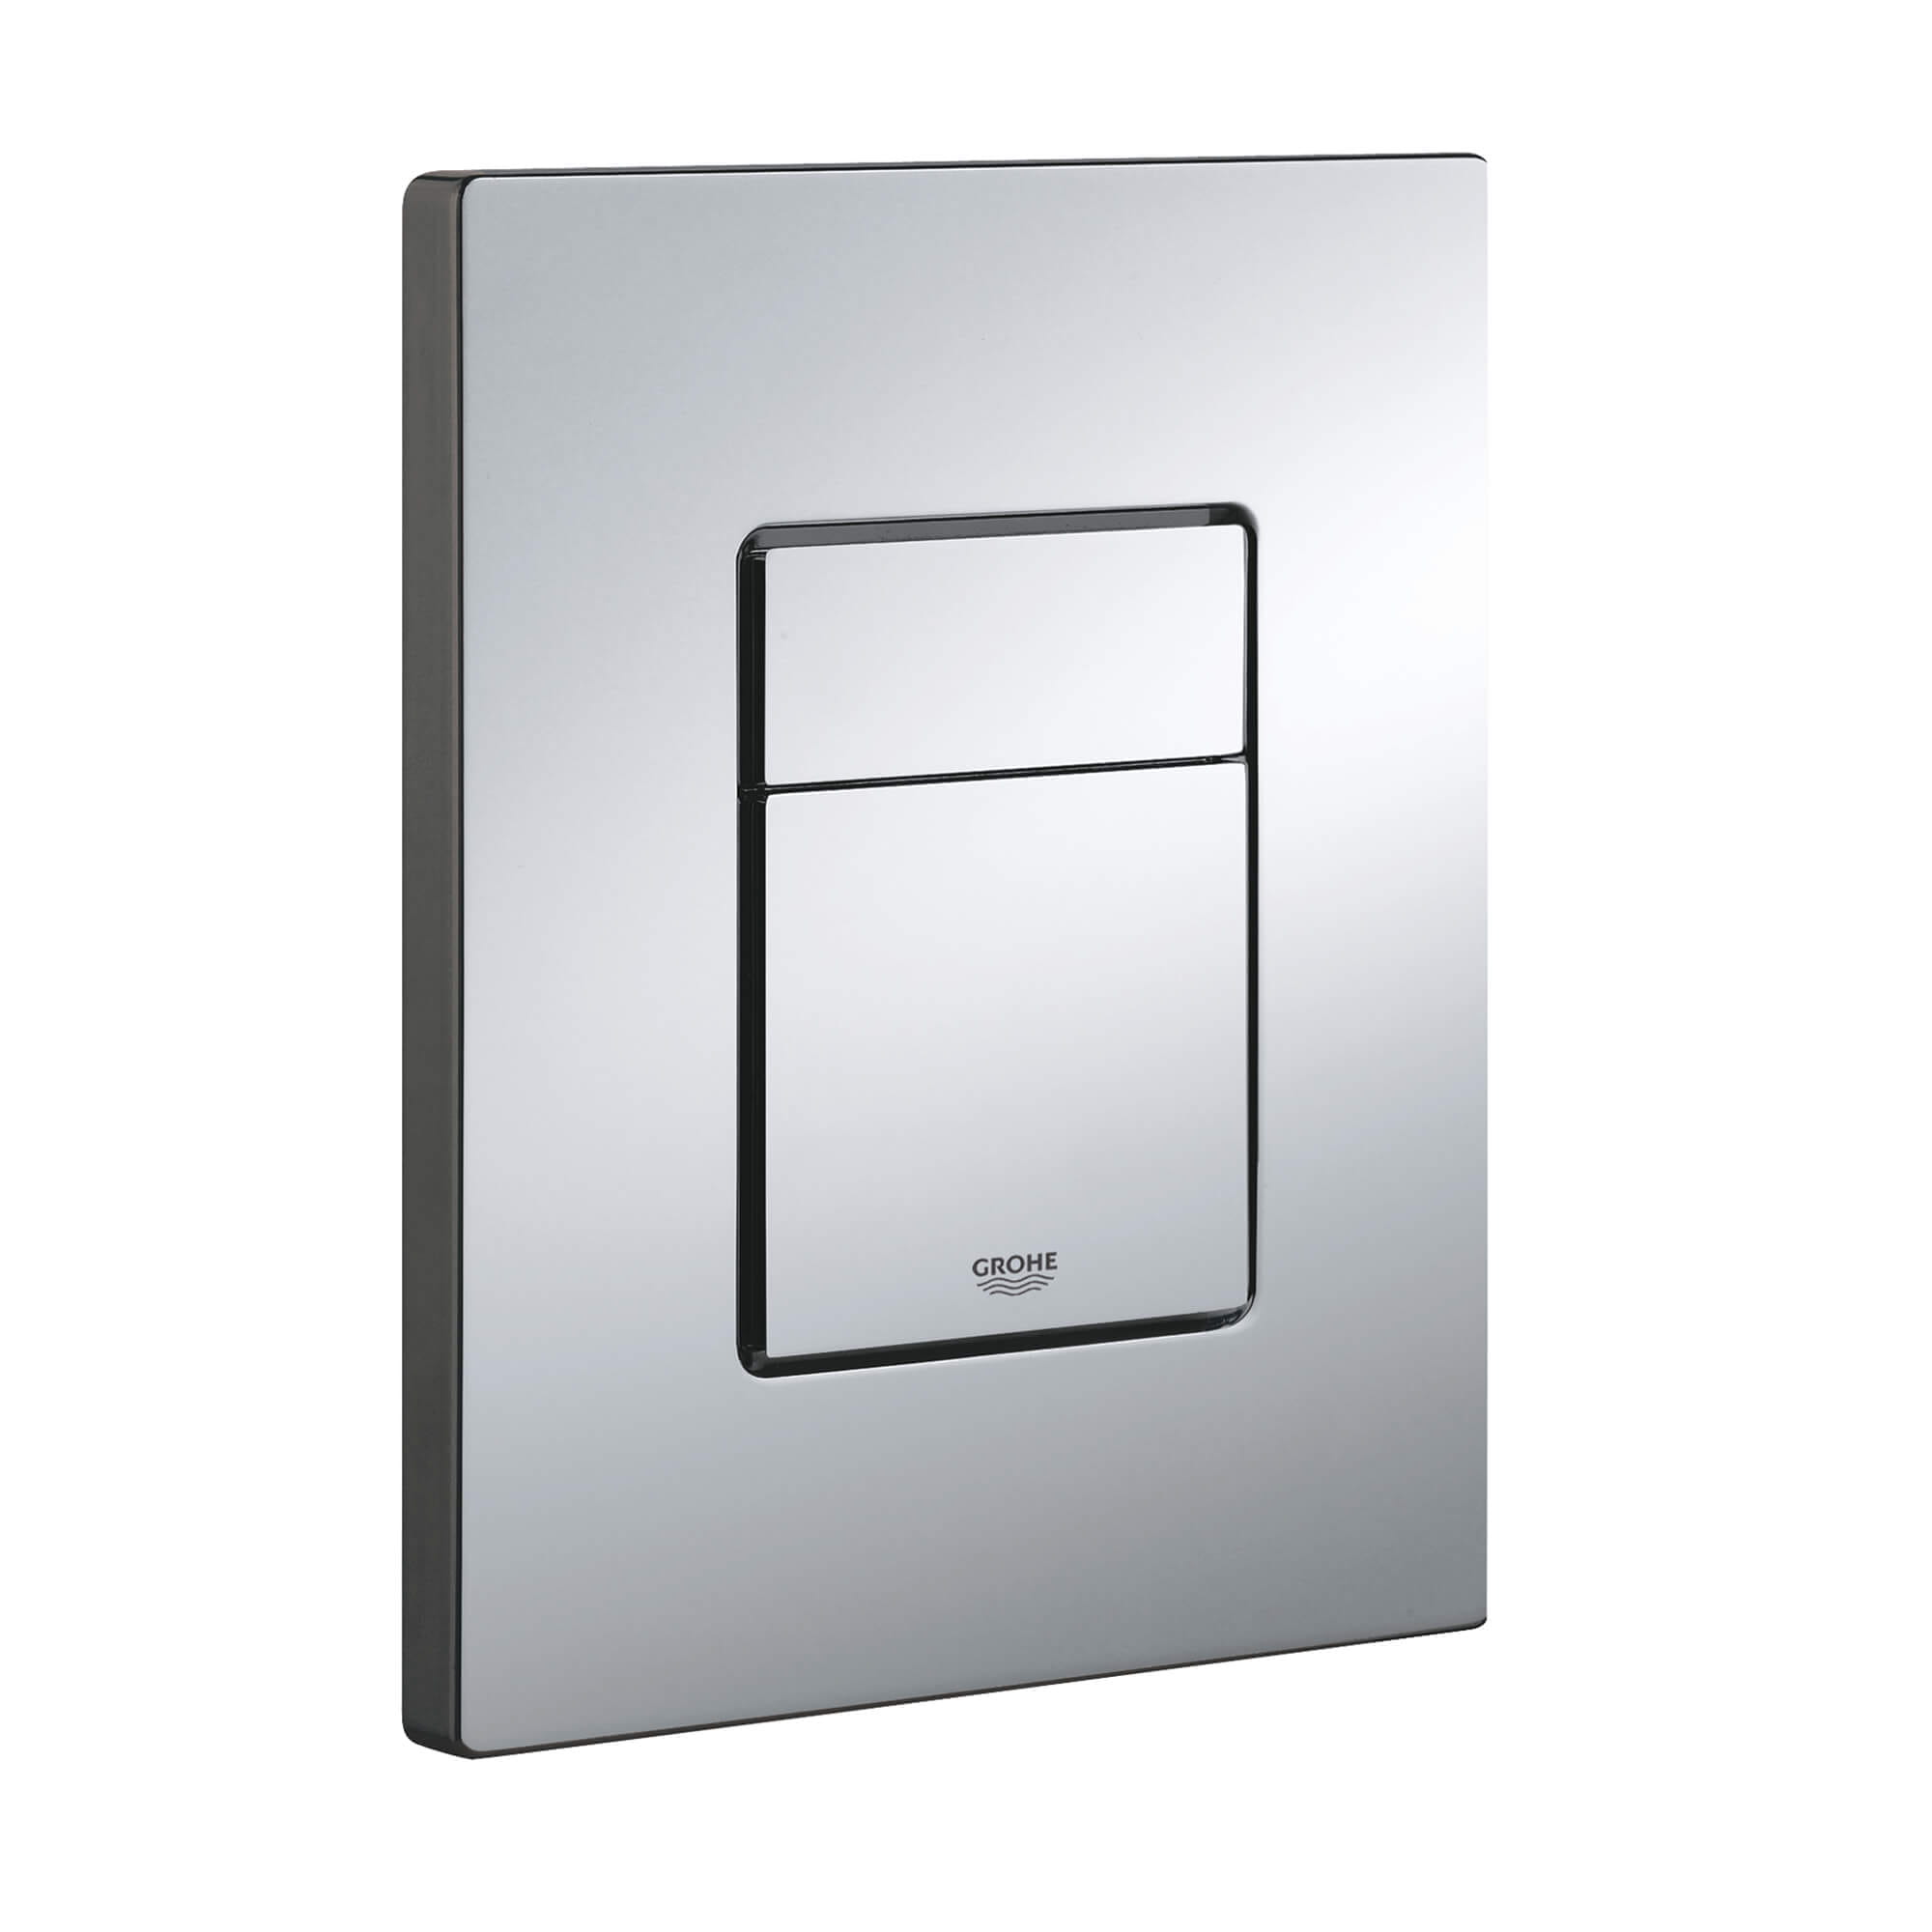 Wall Plate